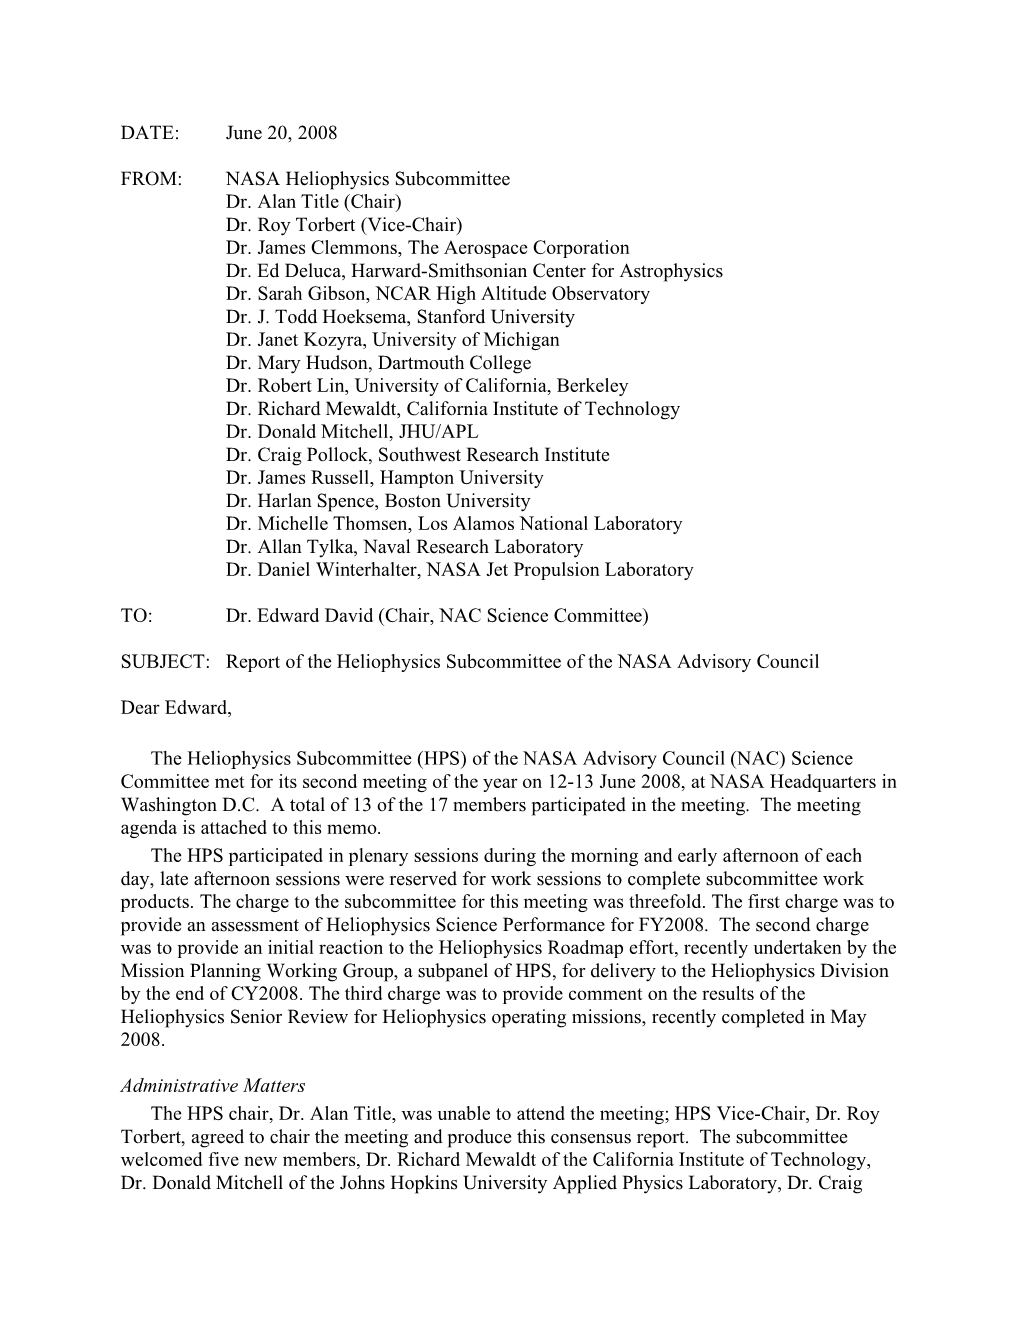 NASA Heliophysics Subcommittee Dr. Alan Title (Chair) Dr. Roy Torbert (Vice-Chair) Dr